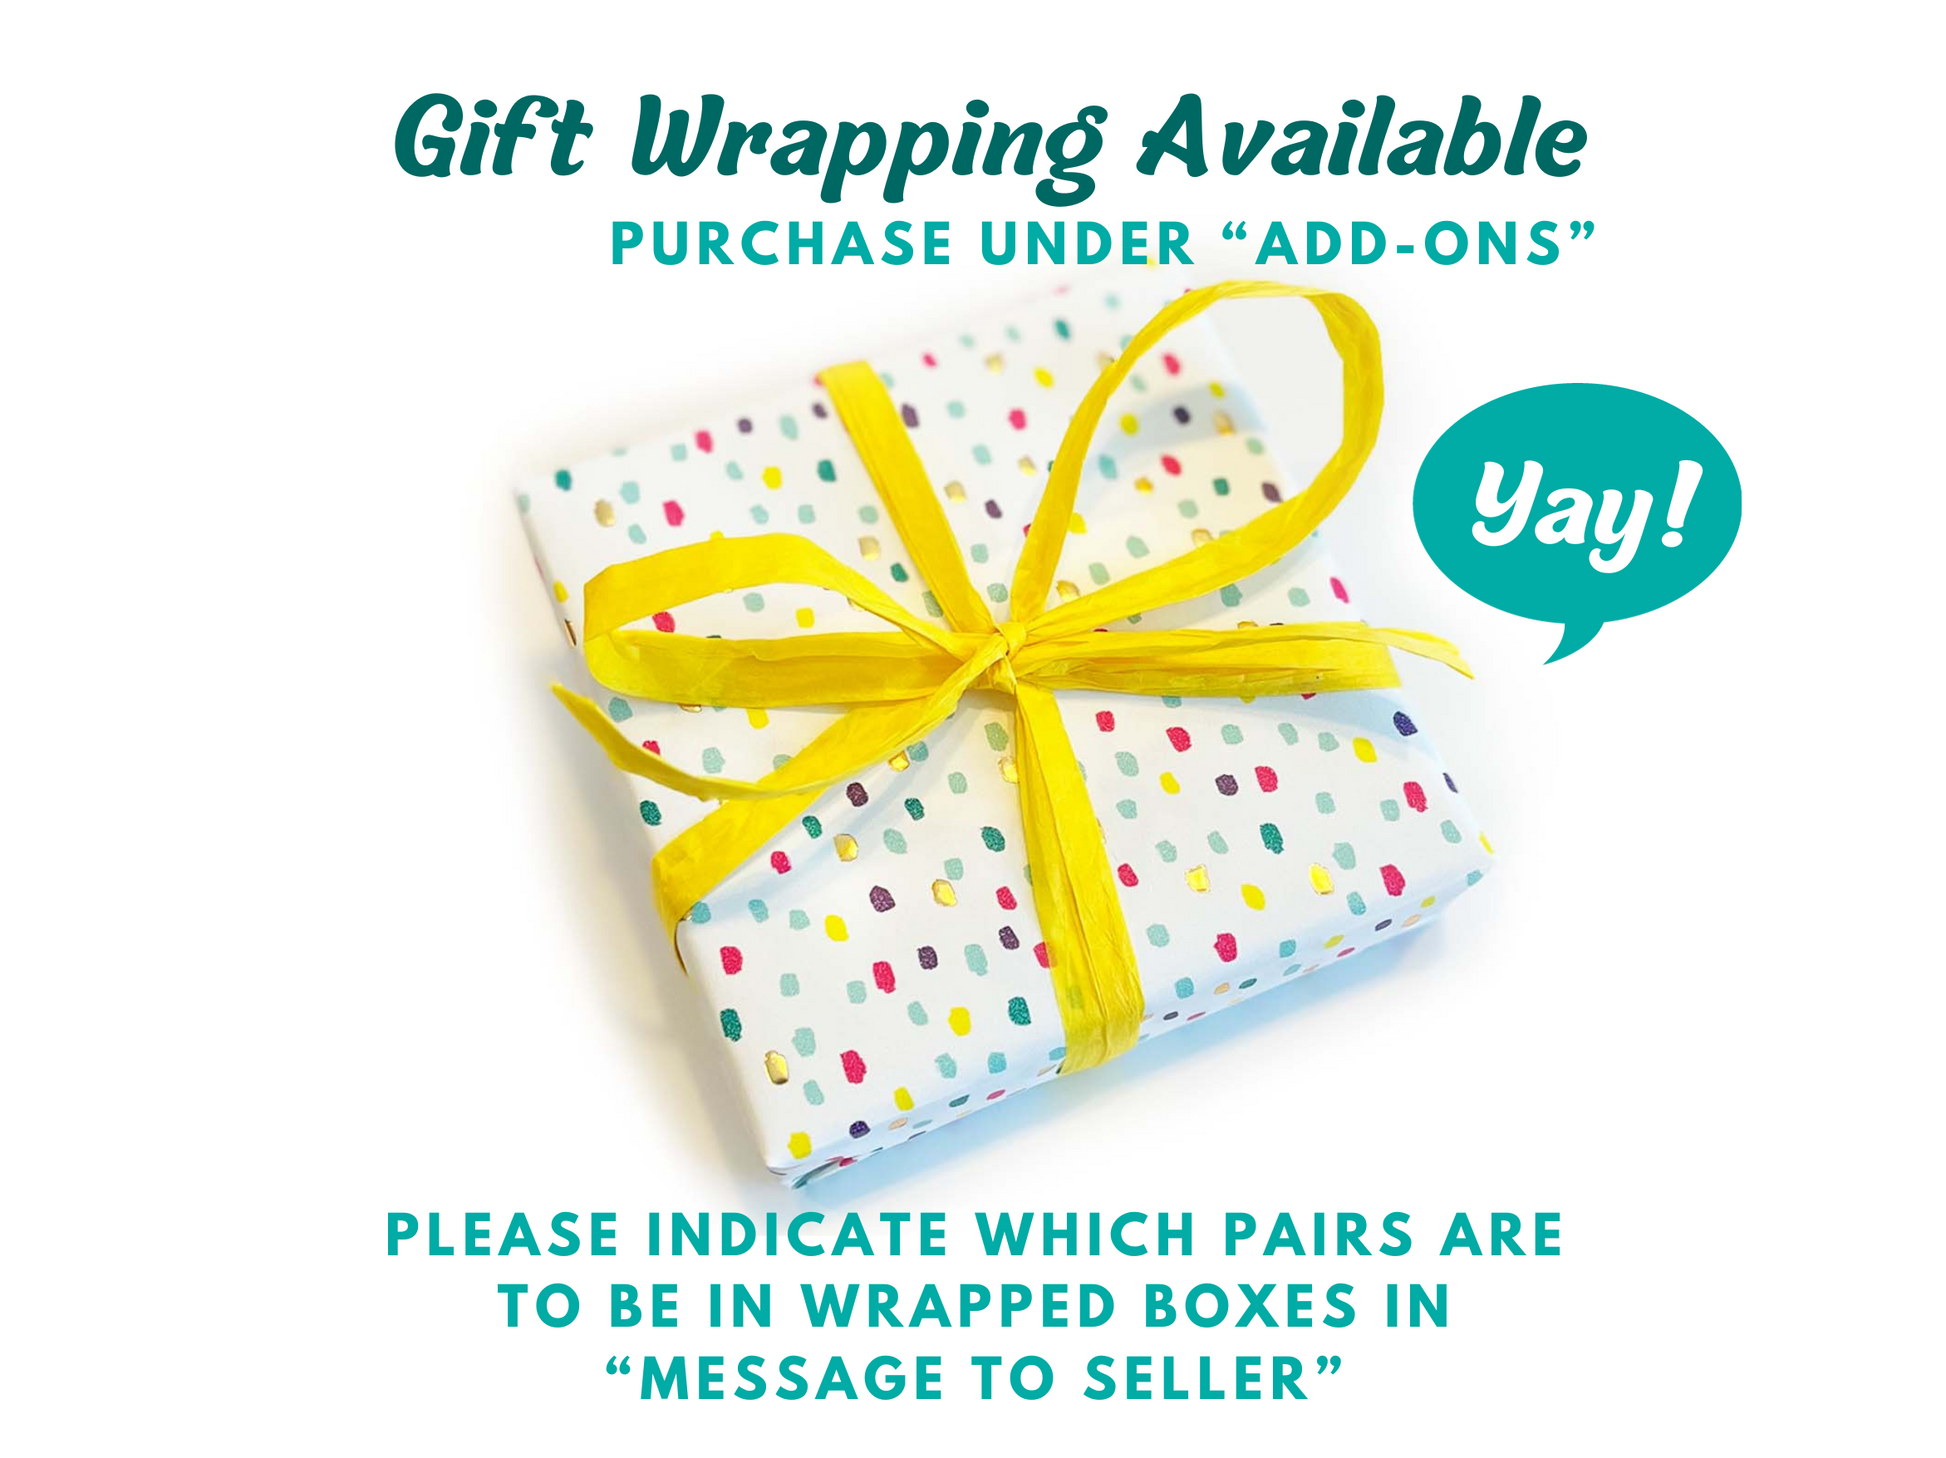 a gift wrapped in polka dot paper with a yellow ribbon